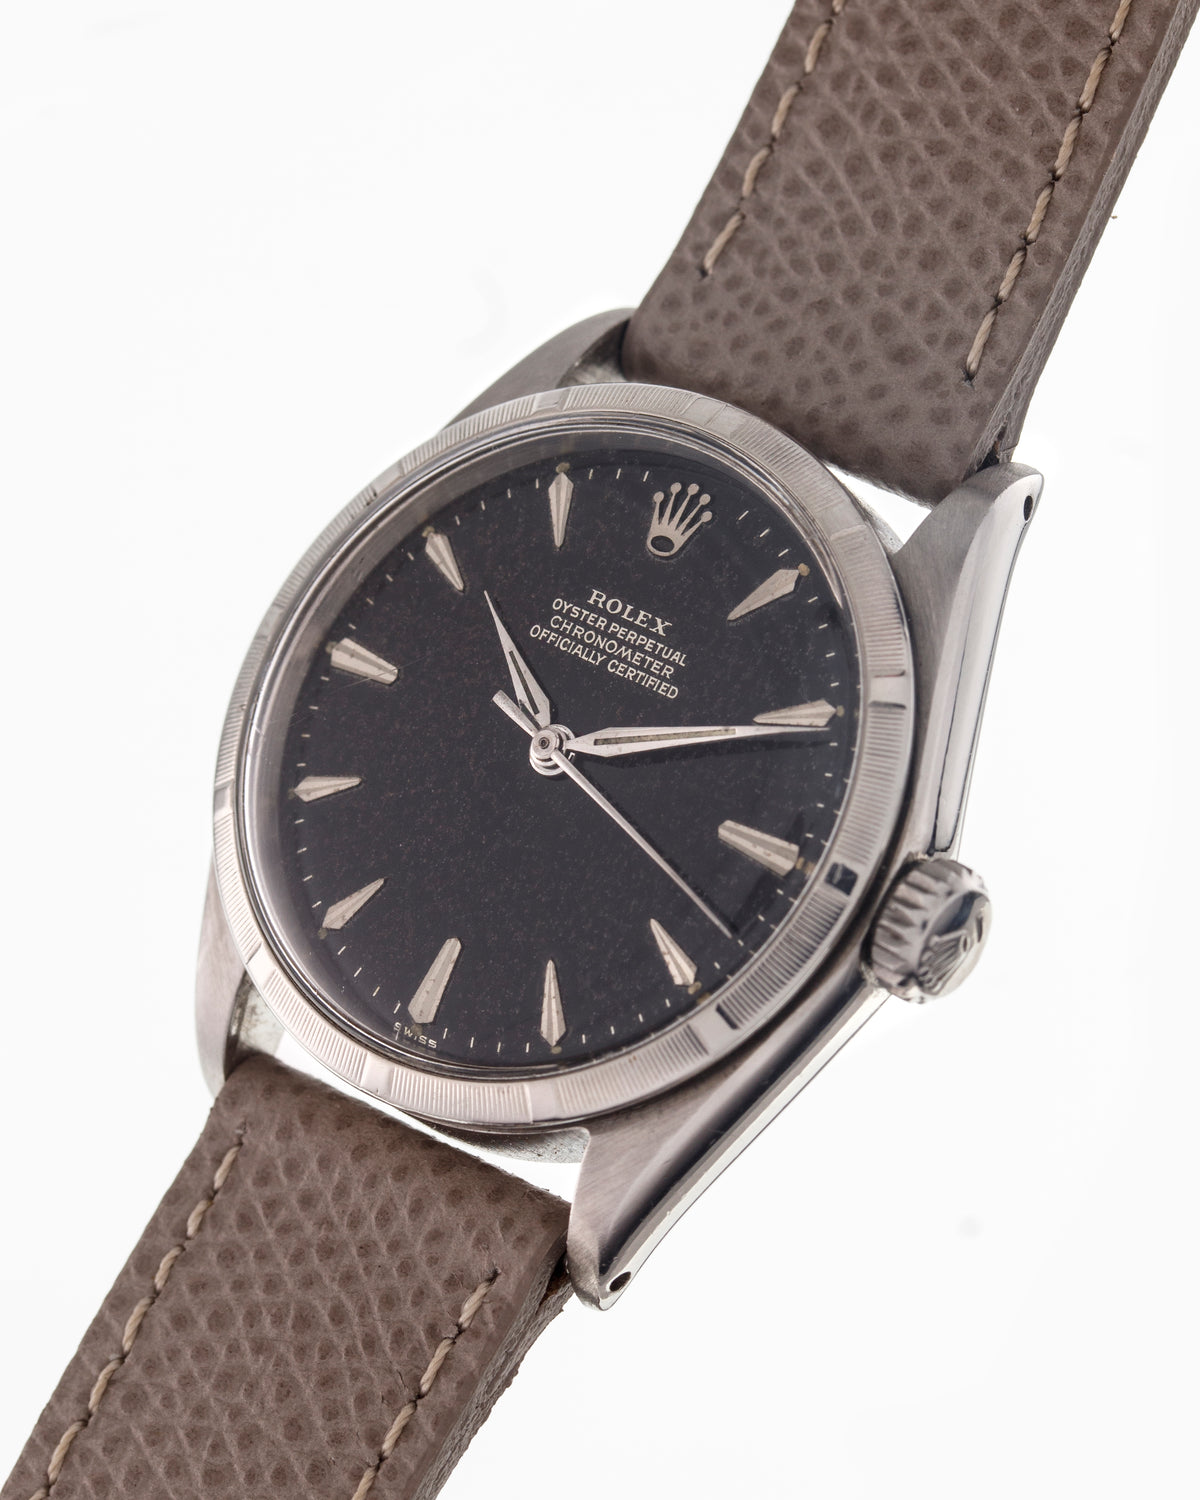 Rolex Oyster Perpetual special black dial ref. 6285